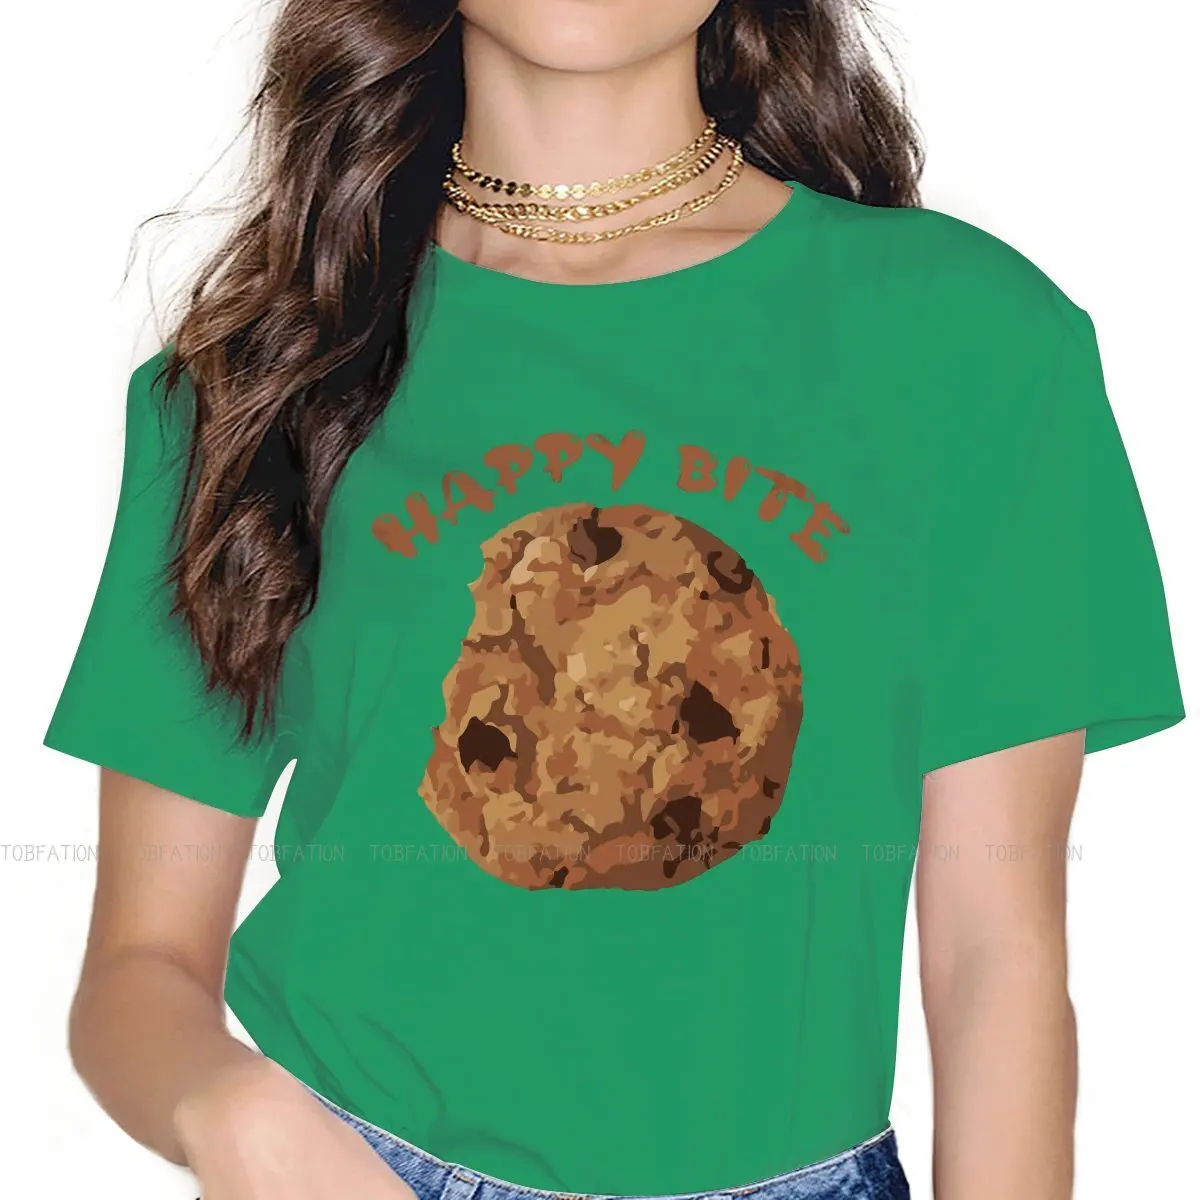 

Happy Bite Special TShirt for Girl Chips Ahoy Chocolate Cookie Cartoon 5XL Creative Gift Clothes T Shirt Stuff Ofertas